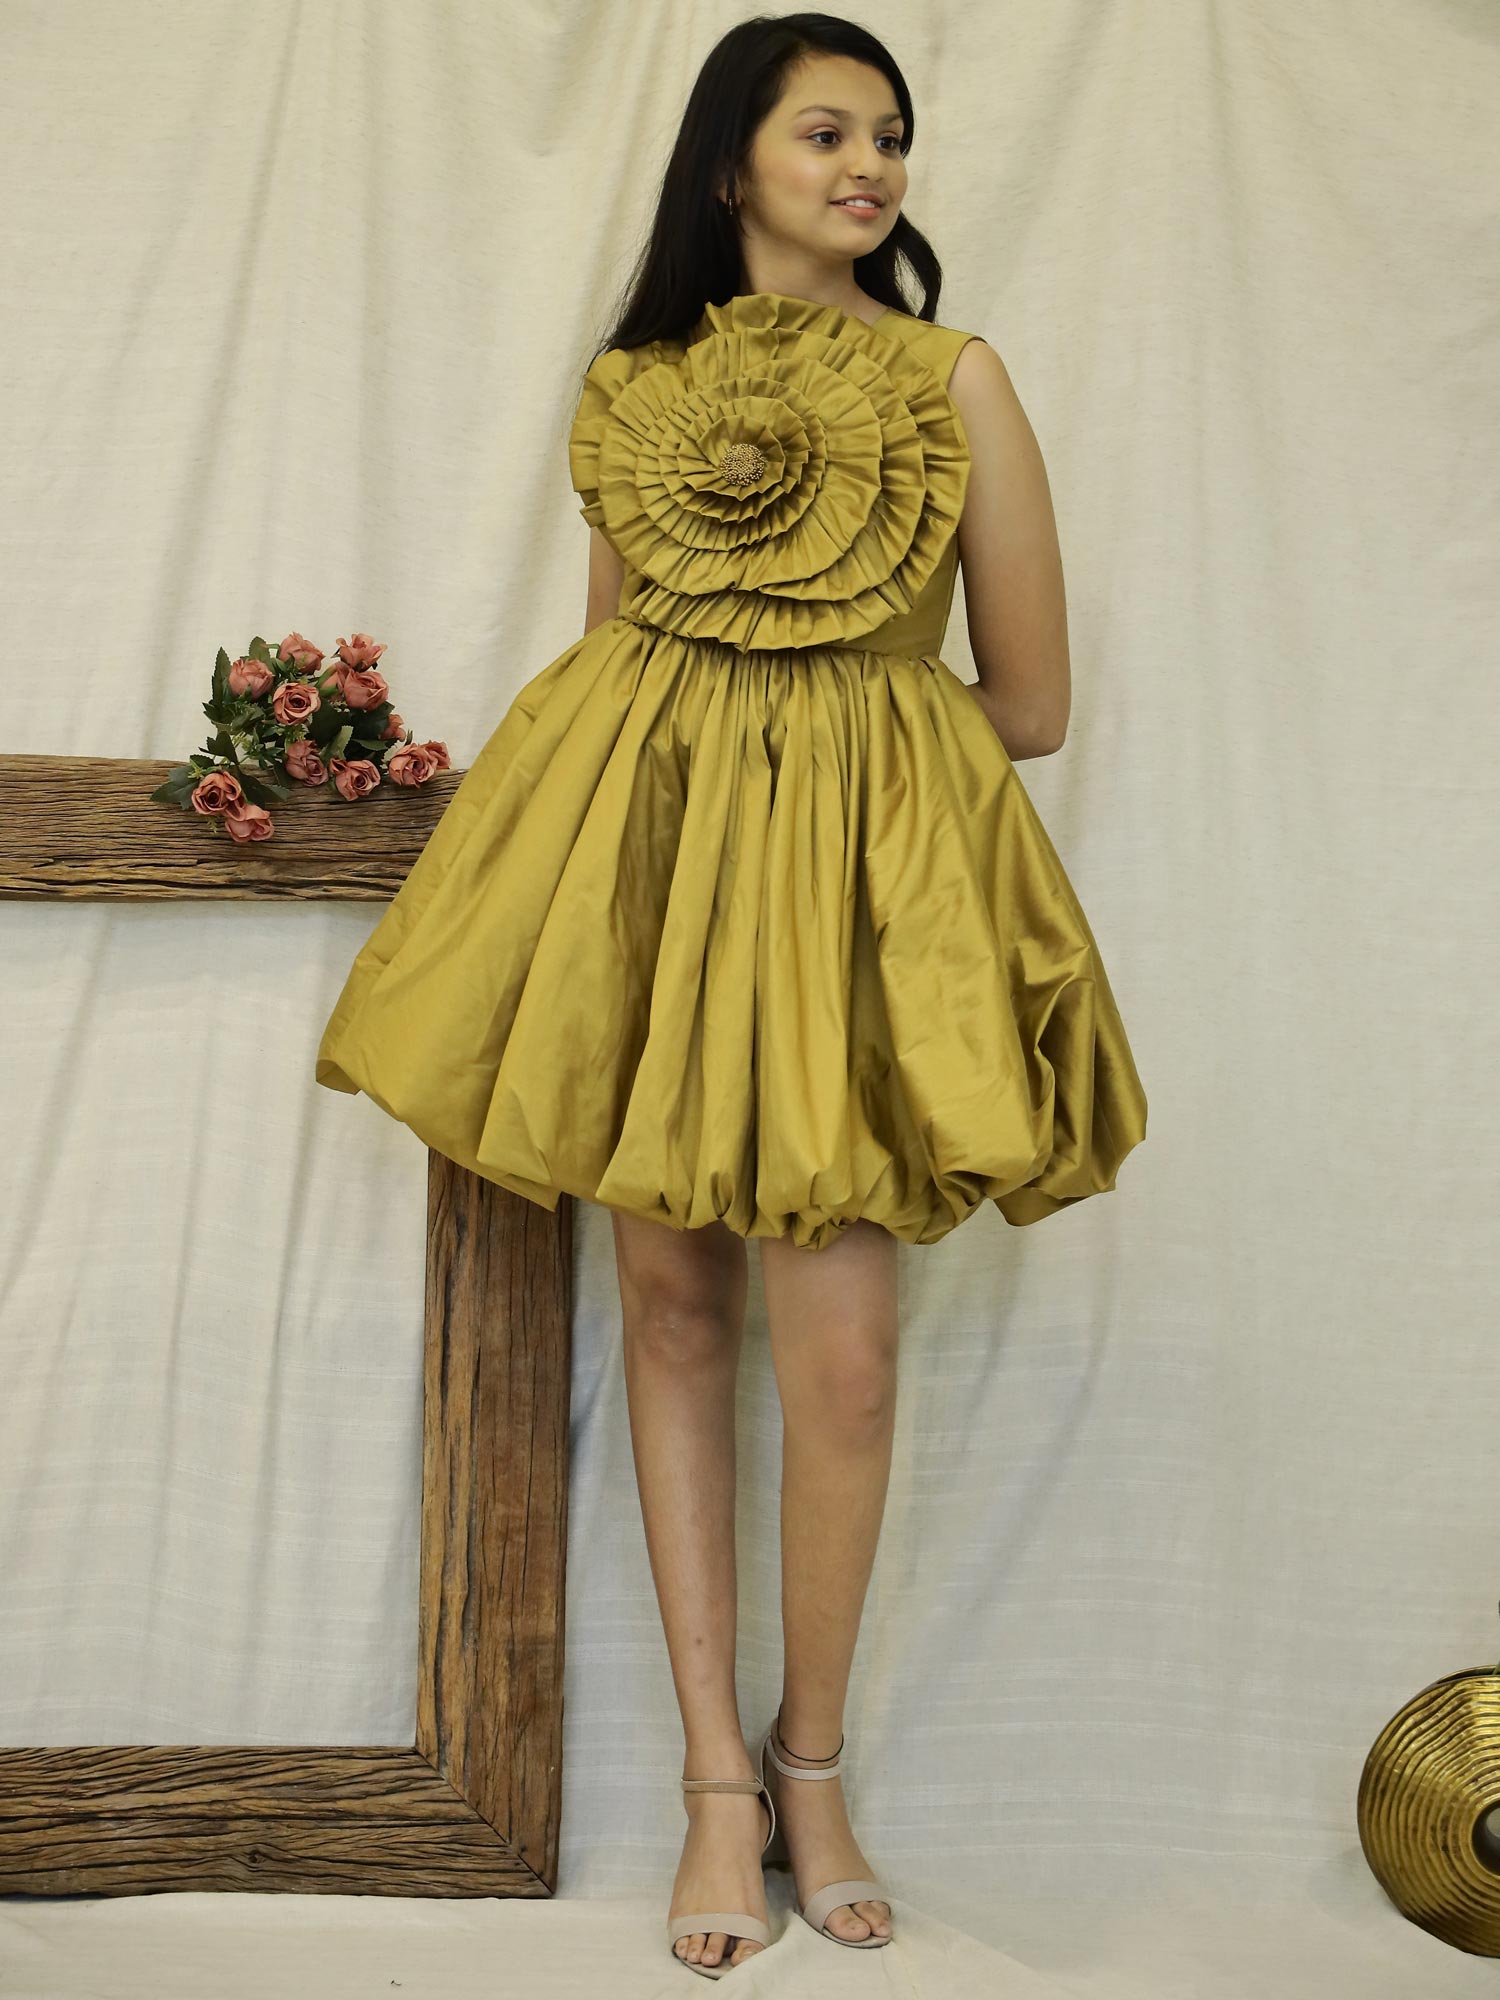 Golden Drape Girls Party Dress with Hair Accessory ( 12Y -13 Y)